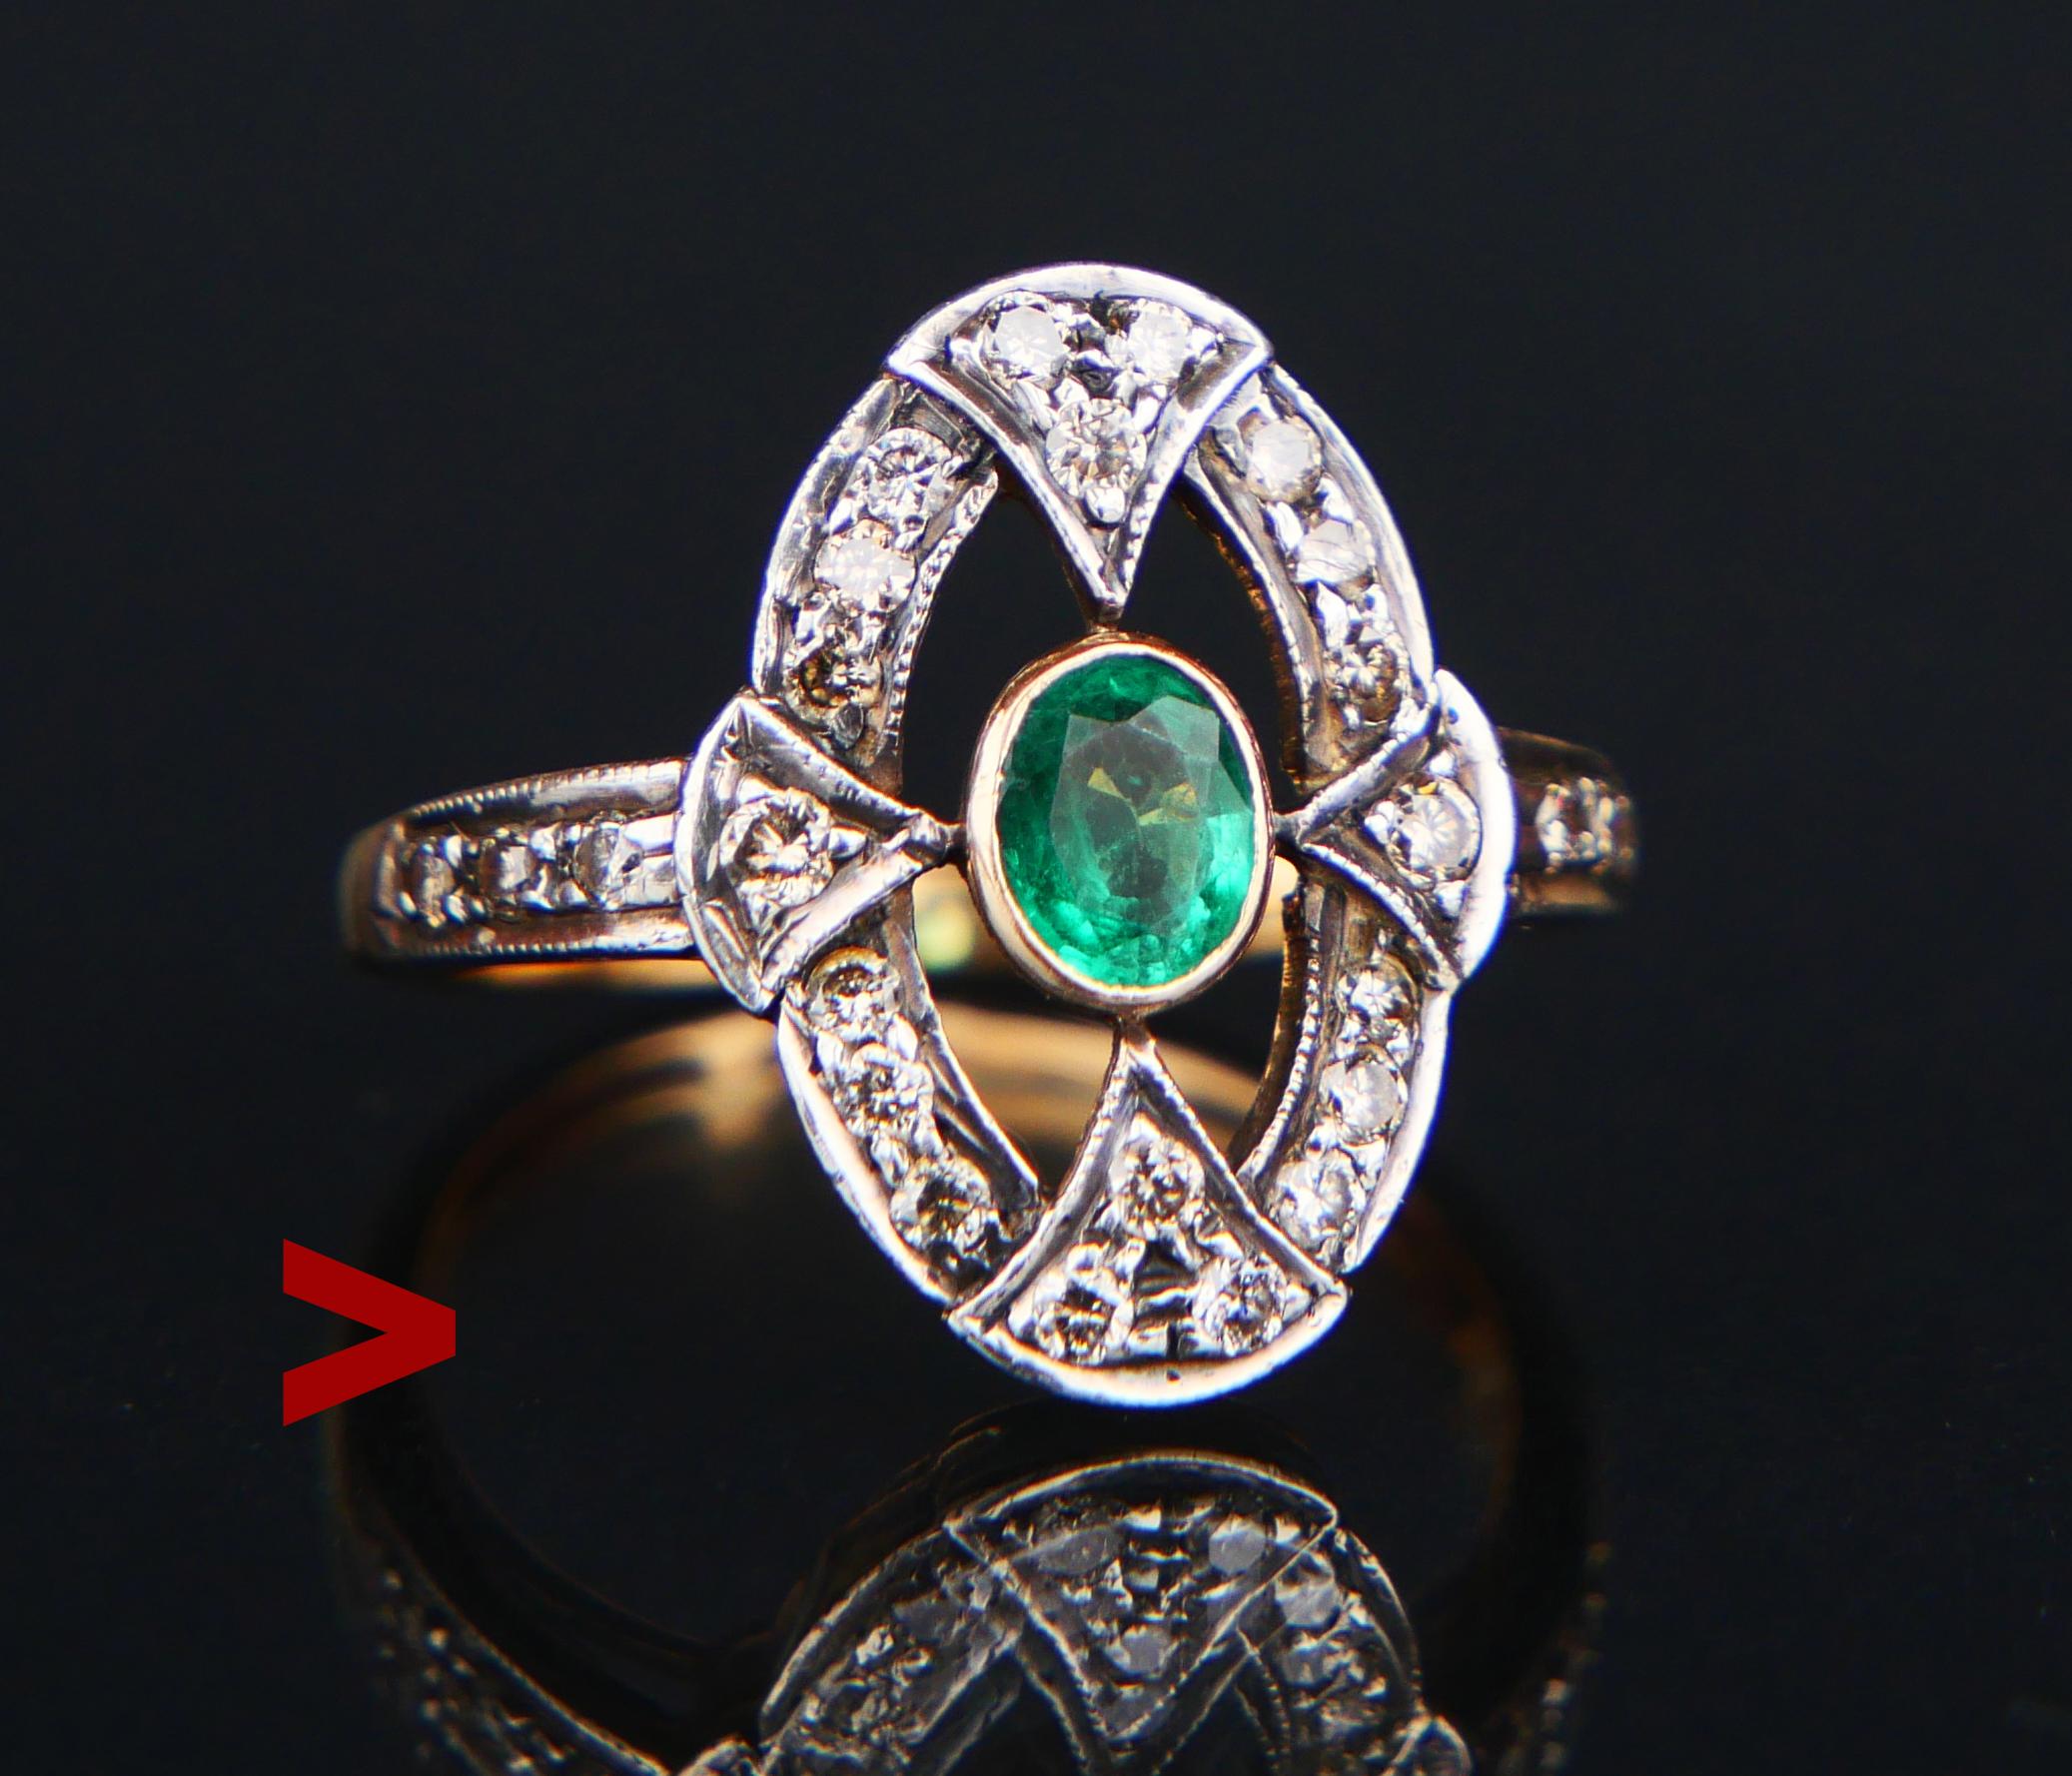 Art Deco period German Ring with Emerald and Diamonds.

Emerald and Diamonds Halo type Ring made in Europe ca.1920s -1930s.

Metal of band in solid 18K Gold, crown in Silver. Emerald's bezel in Yellow Gold. The Crown is 17 mm x 13 mm x 3 mm